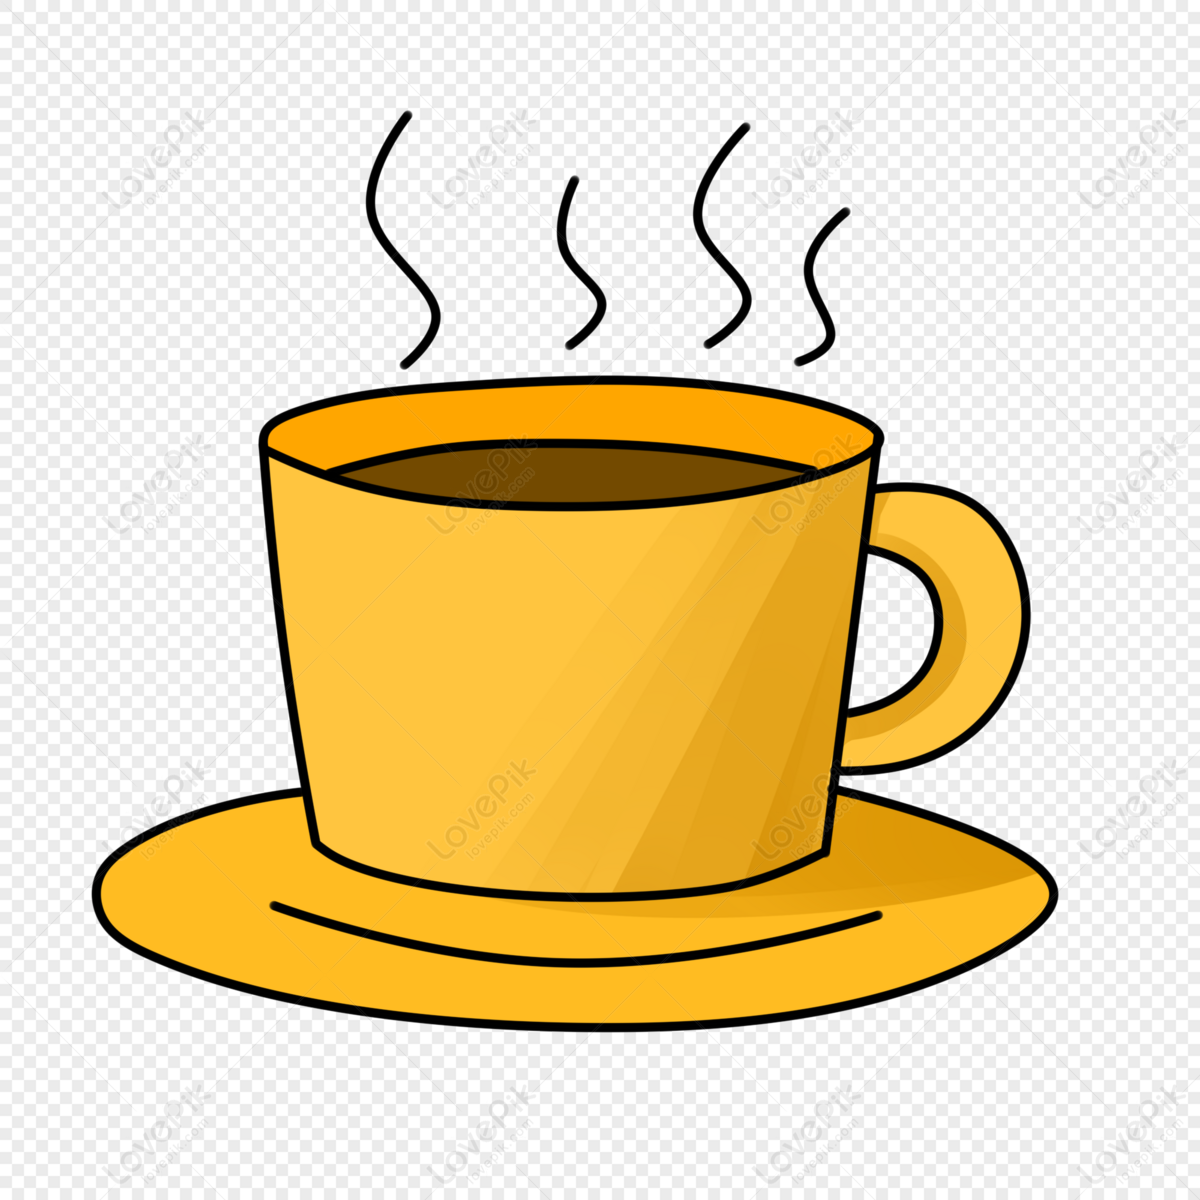 https://img.lovepik.com/free-png/20210919/lovepik-drinking-cartoon-hand-painted-coffee-png-image_401009959_wh1200.png